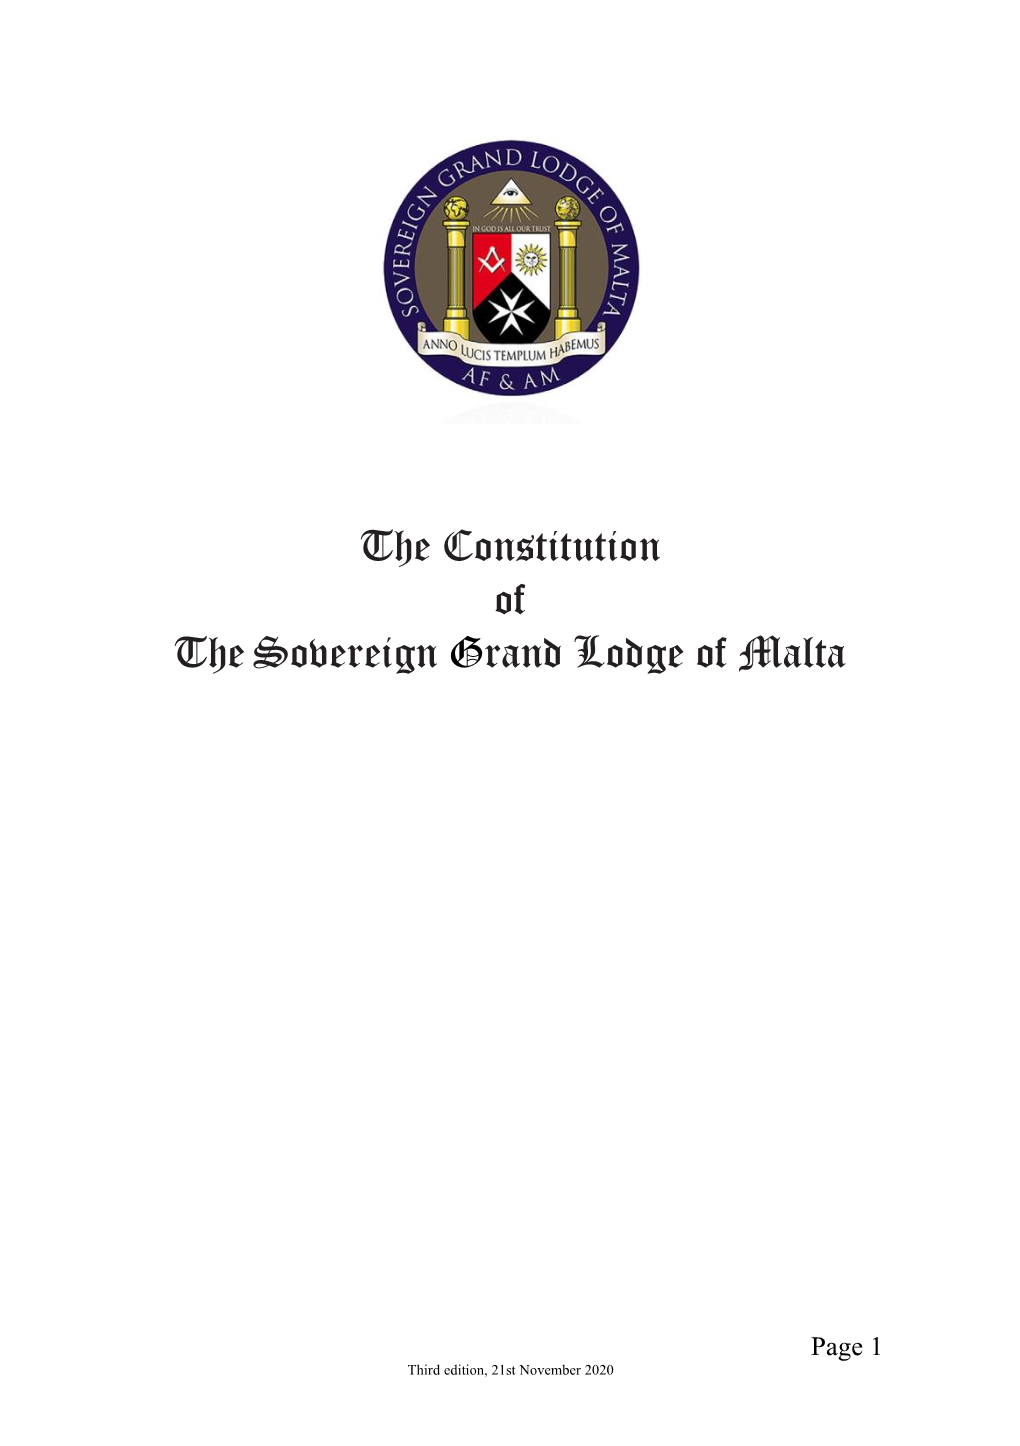 The Constitution of the Sovereign Grand Lodge of Malta